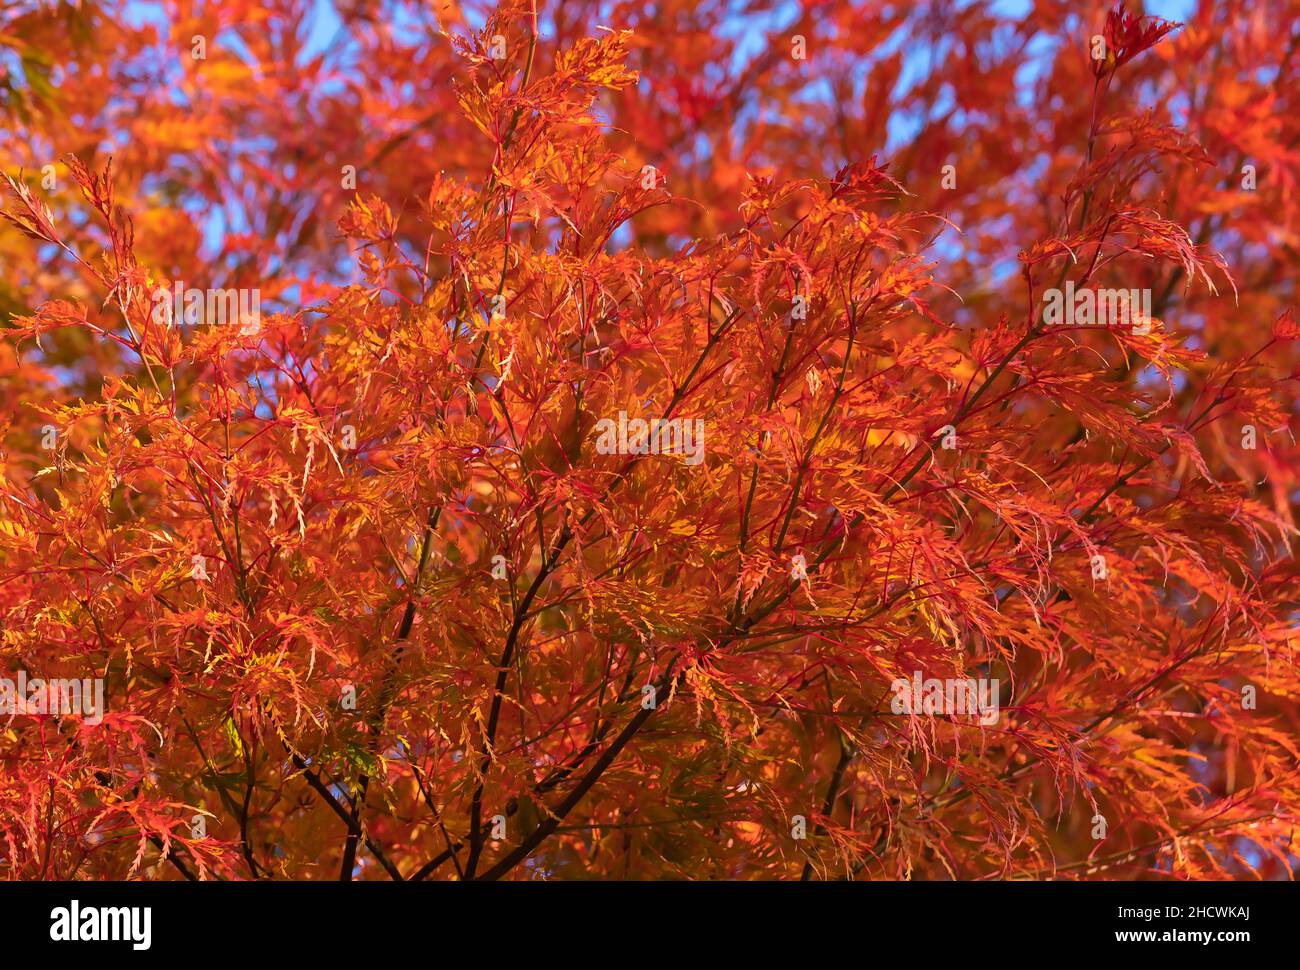 Acer palmatum dissectum, Ever Red tree, Weeping, Japanese, Maple Trees, Dwarf Japanese Maples, elegant, cascading, structure, wonderful, colouring. Stock Photo